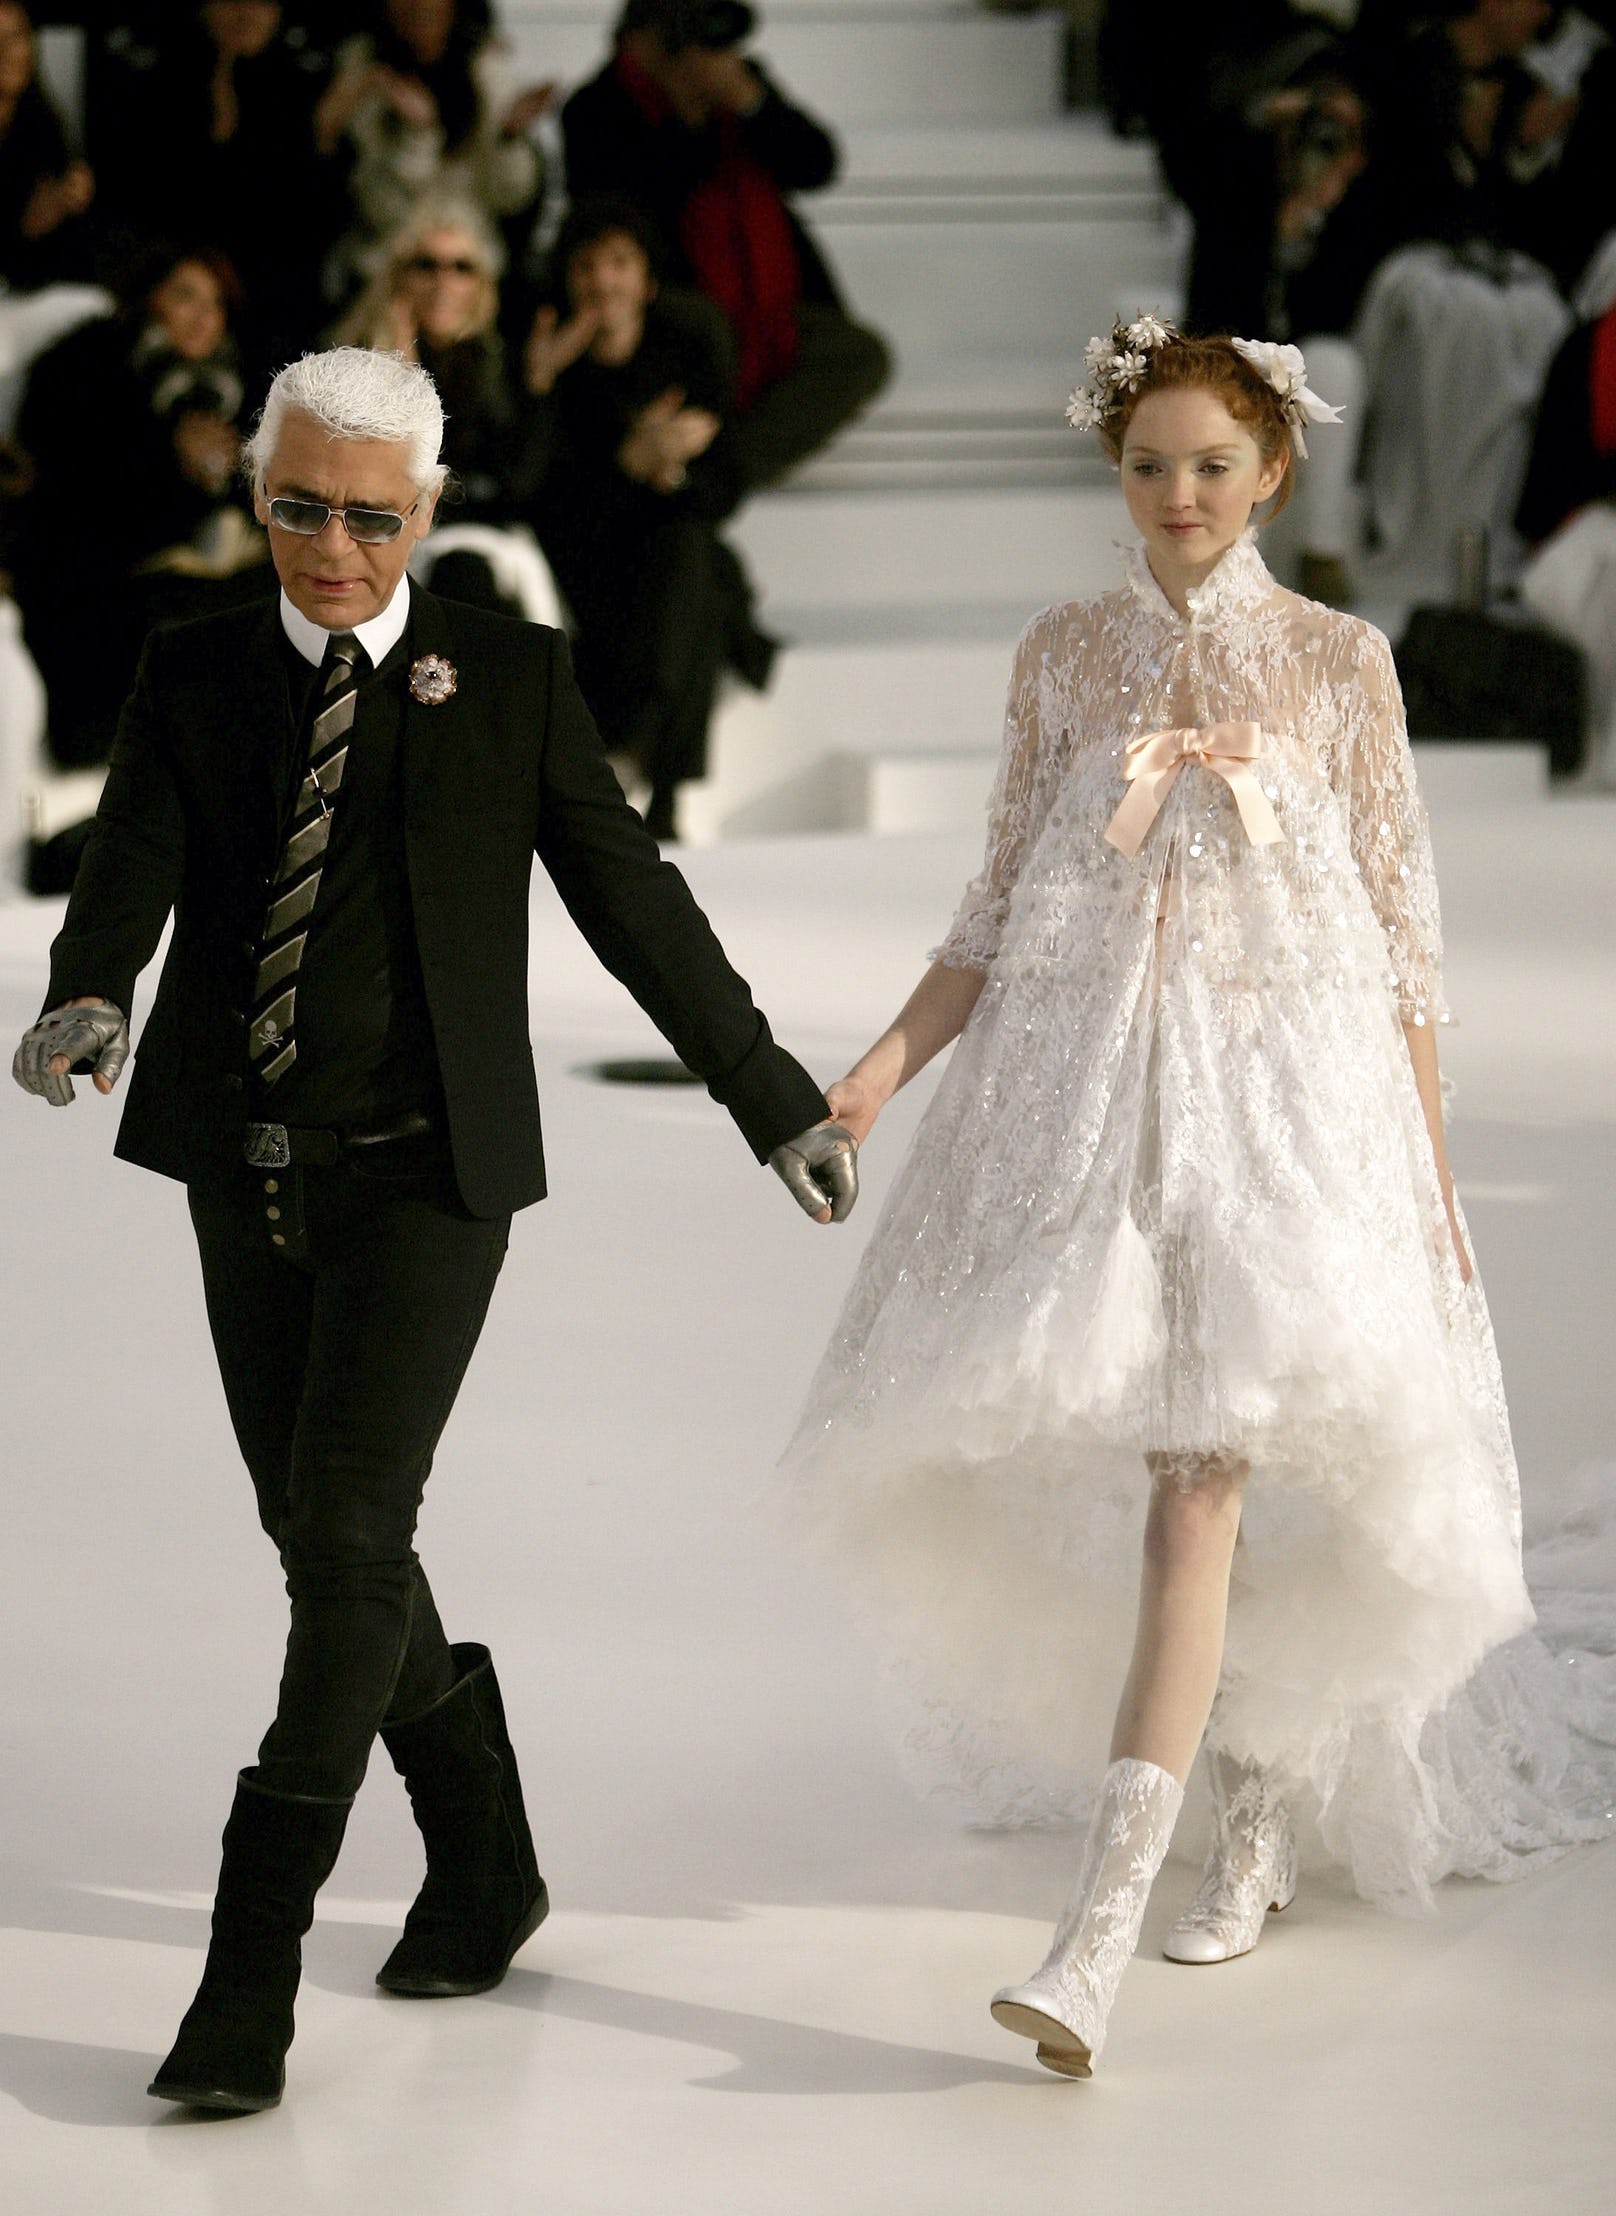 Take Inspiration from Chanel's Couture Brides Throughout History - John  Cain Photography